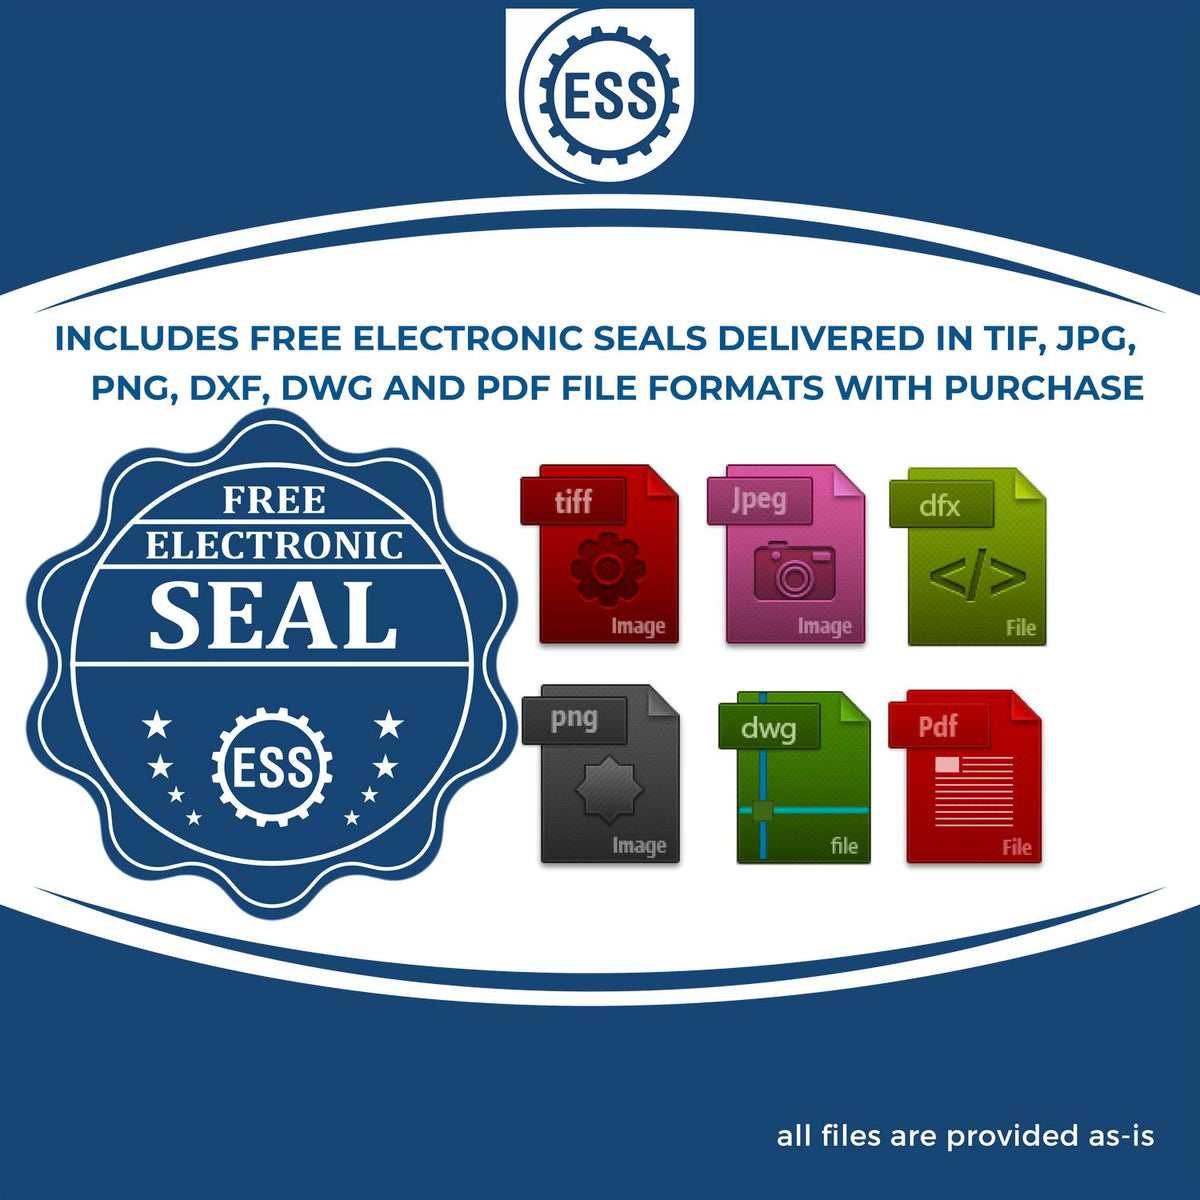 An infographic for the free electronic seal for the Gift New Jersey Geologist Seal illustrating the different file type icons such as DXF, DWG, TIF, JPG and PNG.